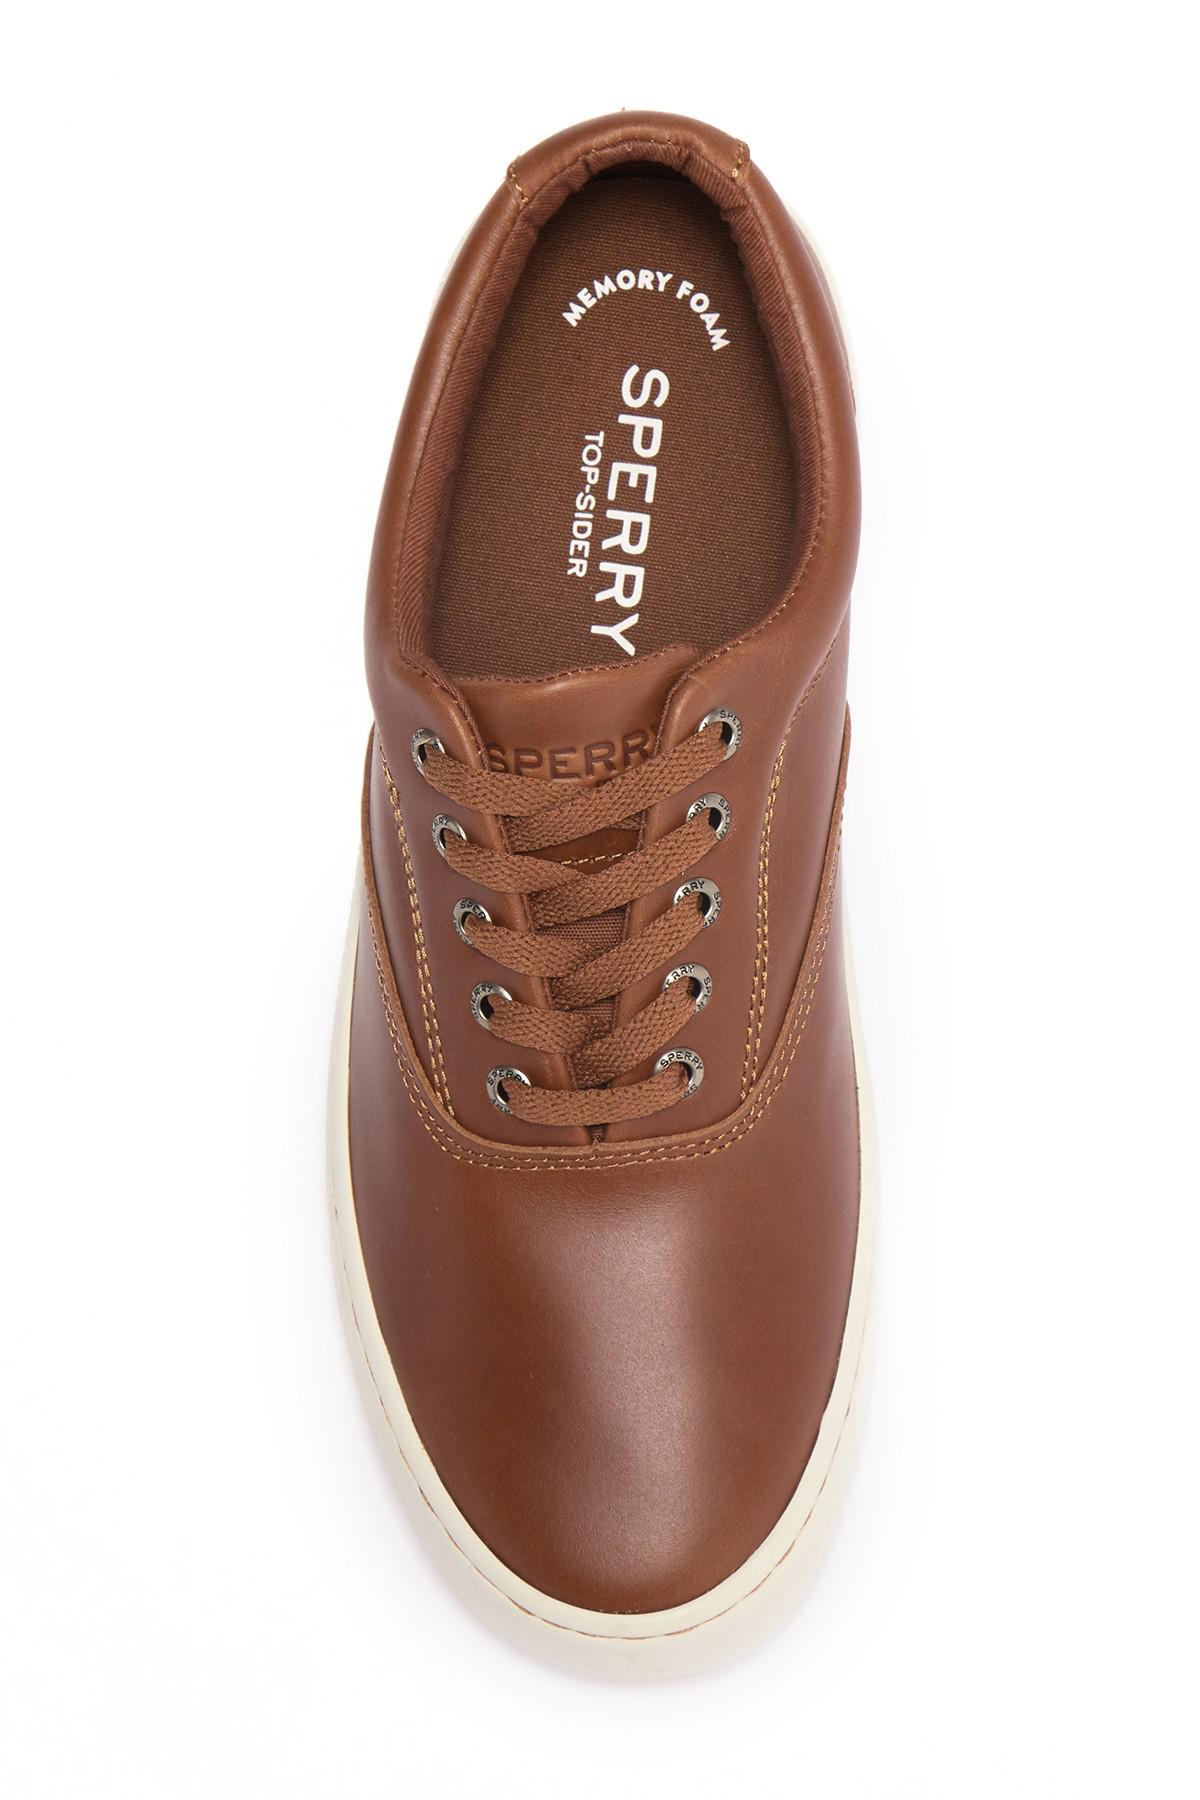 Sperry Top-Sider Cutter Cvo Leather 